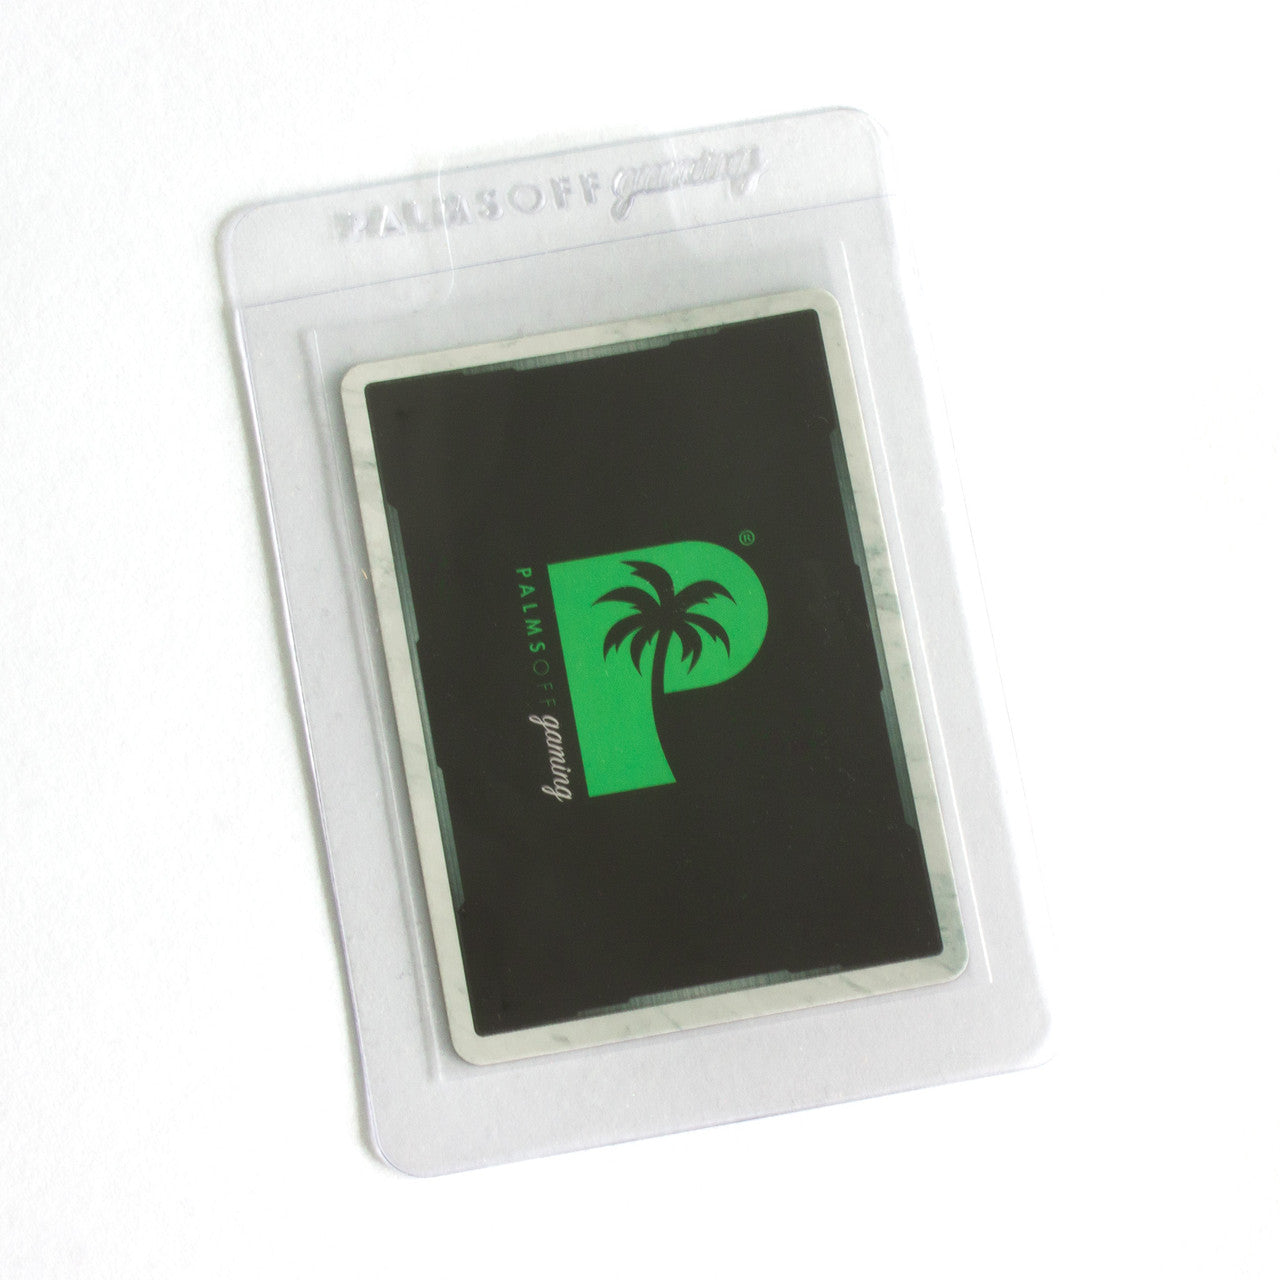 Palms Off Gaming - Tag Soft Sleeves (100pc)